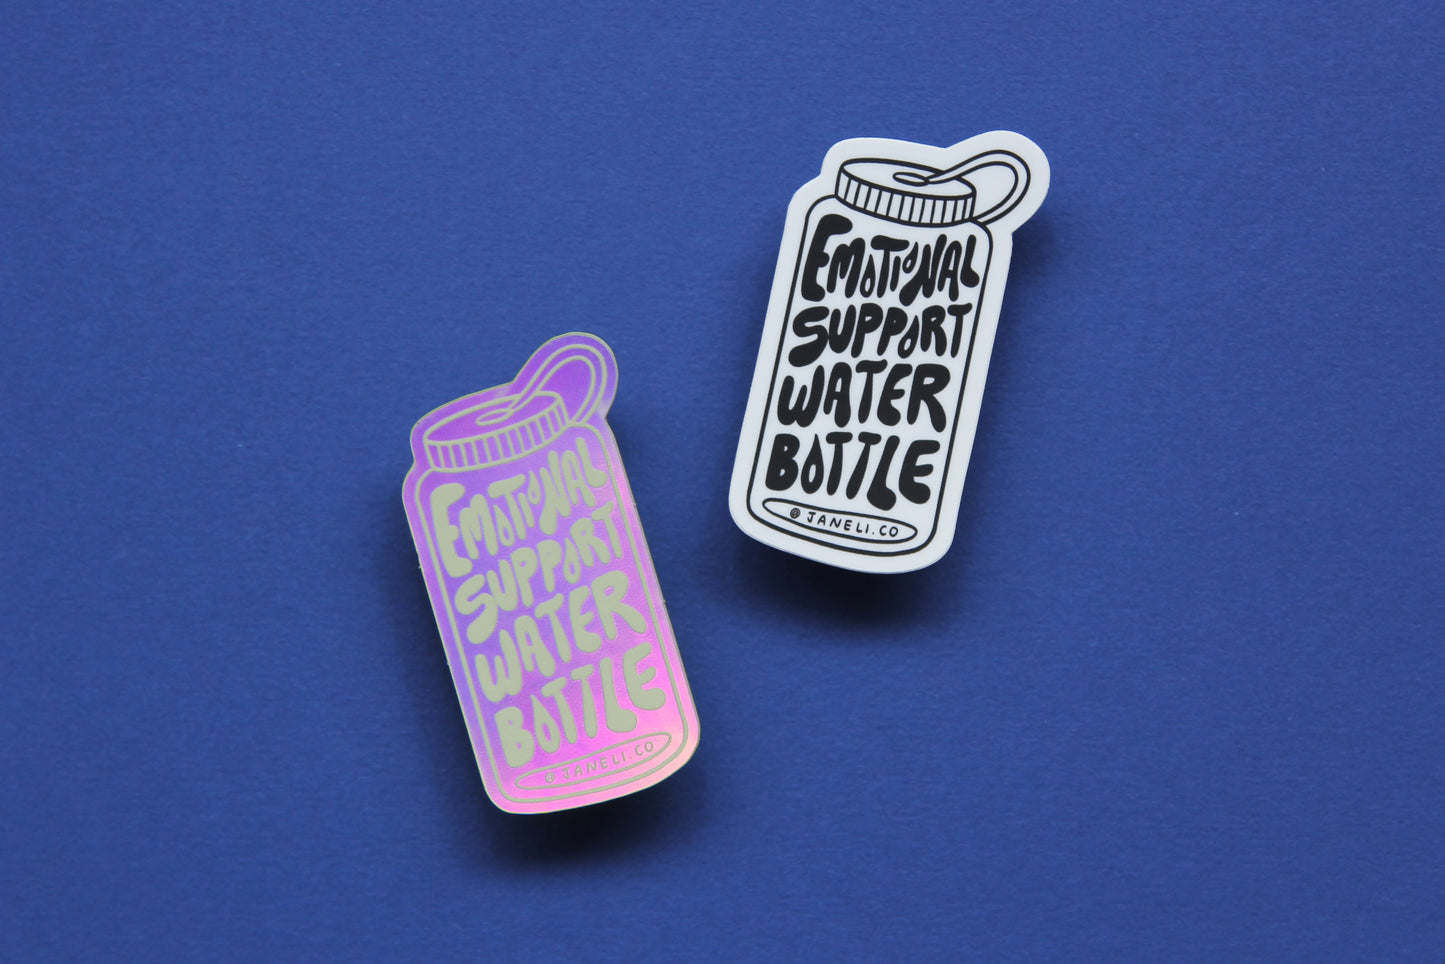 Two JaneLi.Co stickers that say "Emotional Support Water Bottle" in the shape of a water bottle over a navy blue background. One sticker is black and white, and the other is holographic.